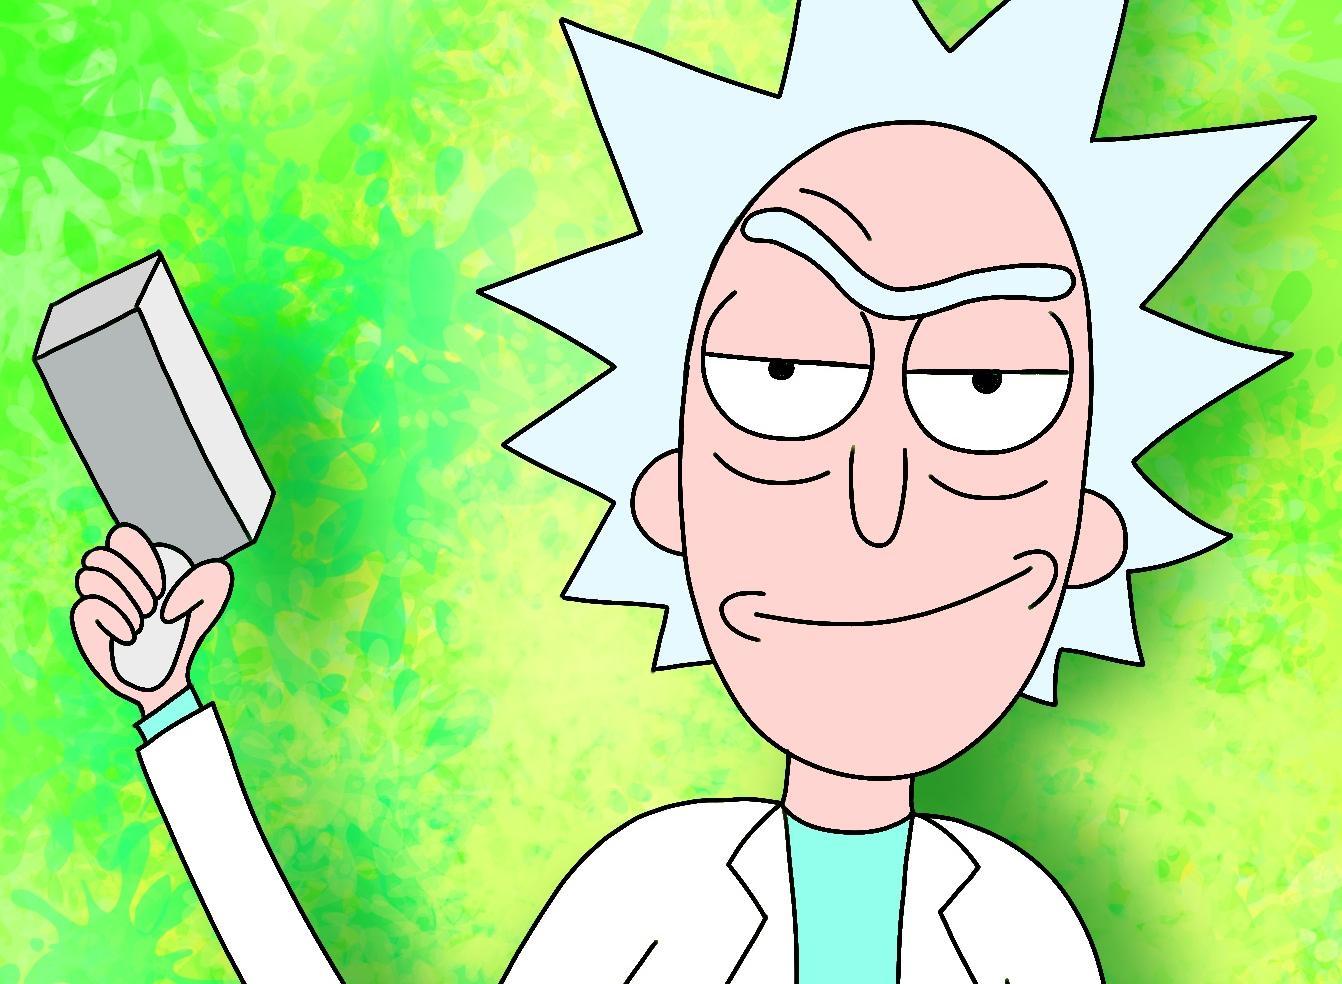 How To Draw Rick Sanchez From Rick And Morty - Draw Central